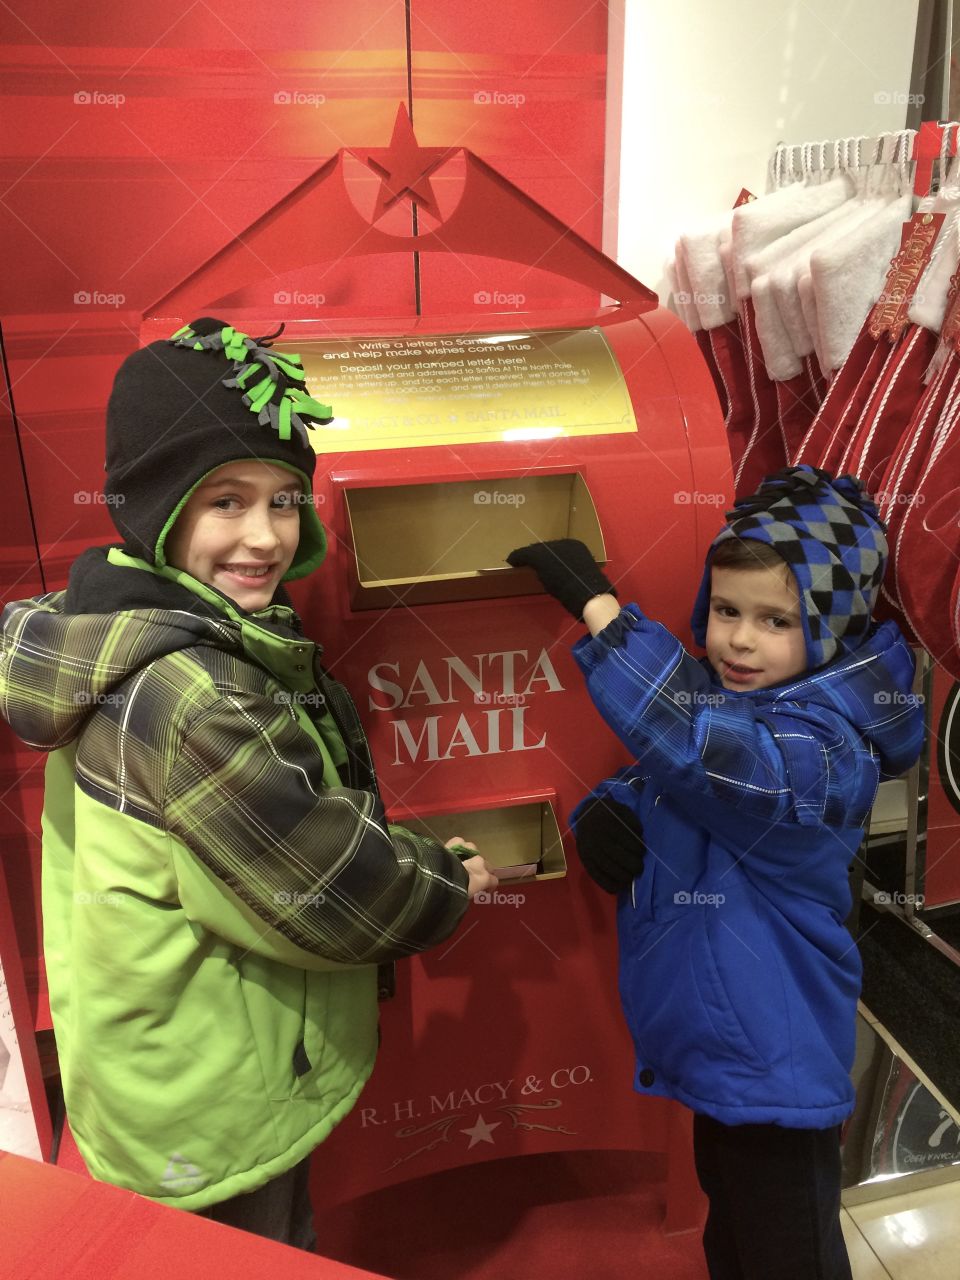 Mailing letters to Santa